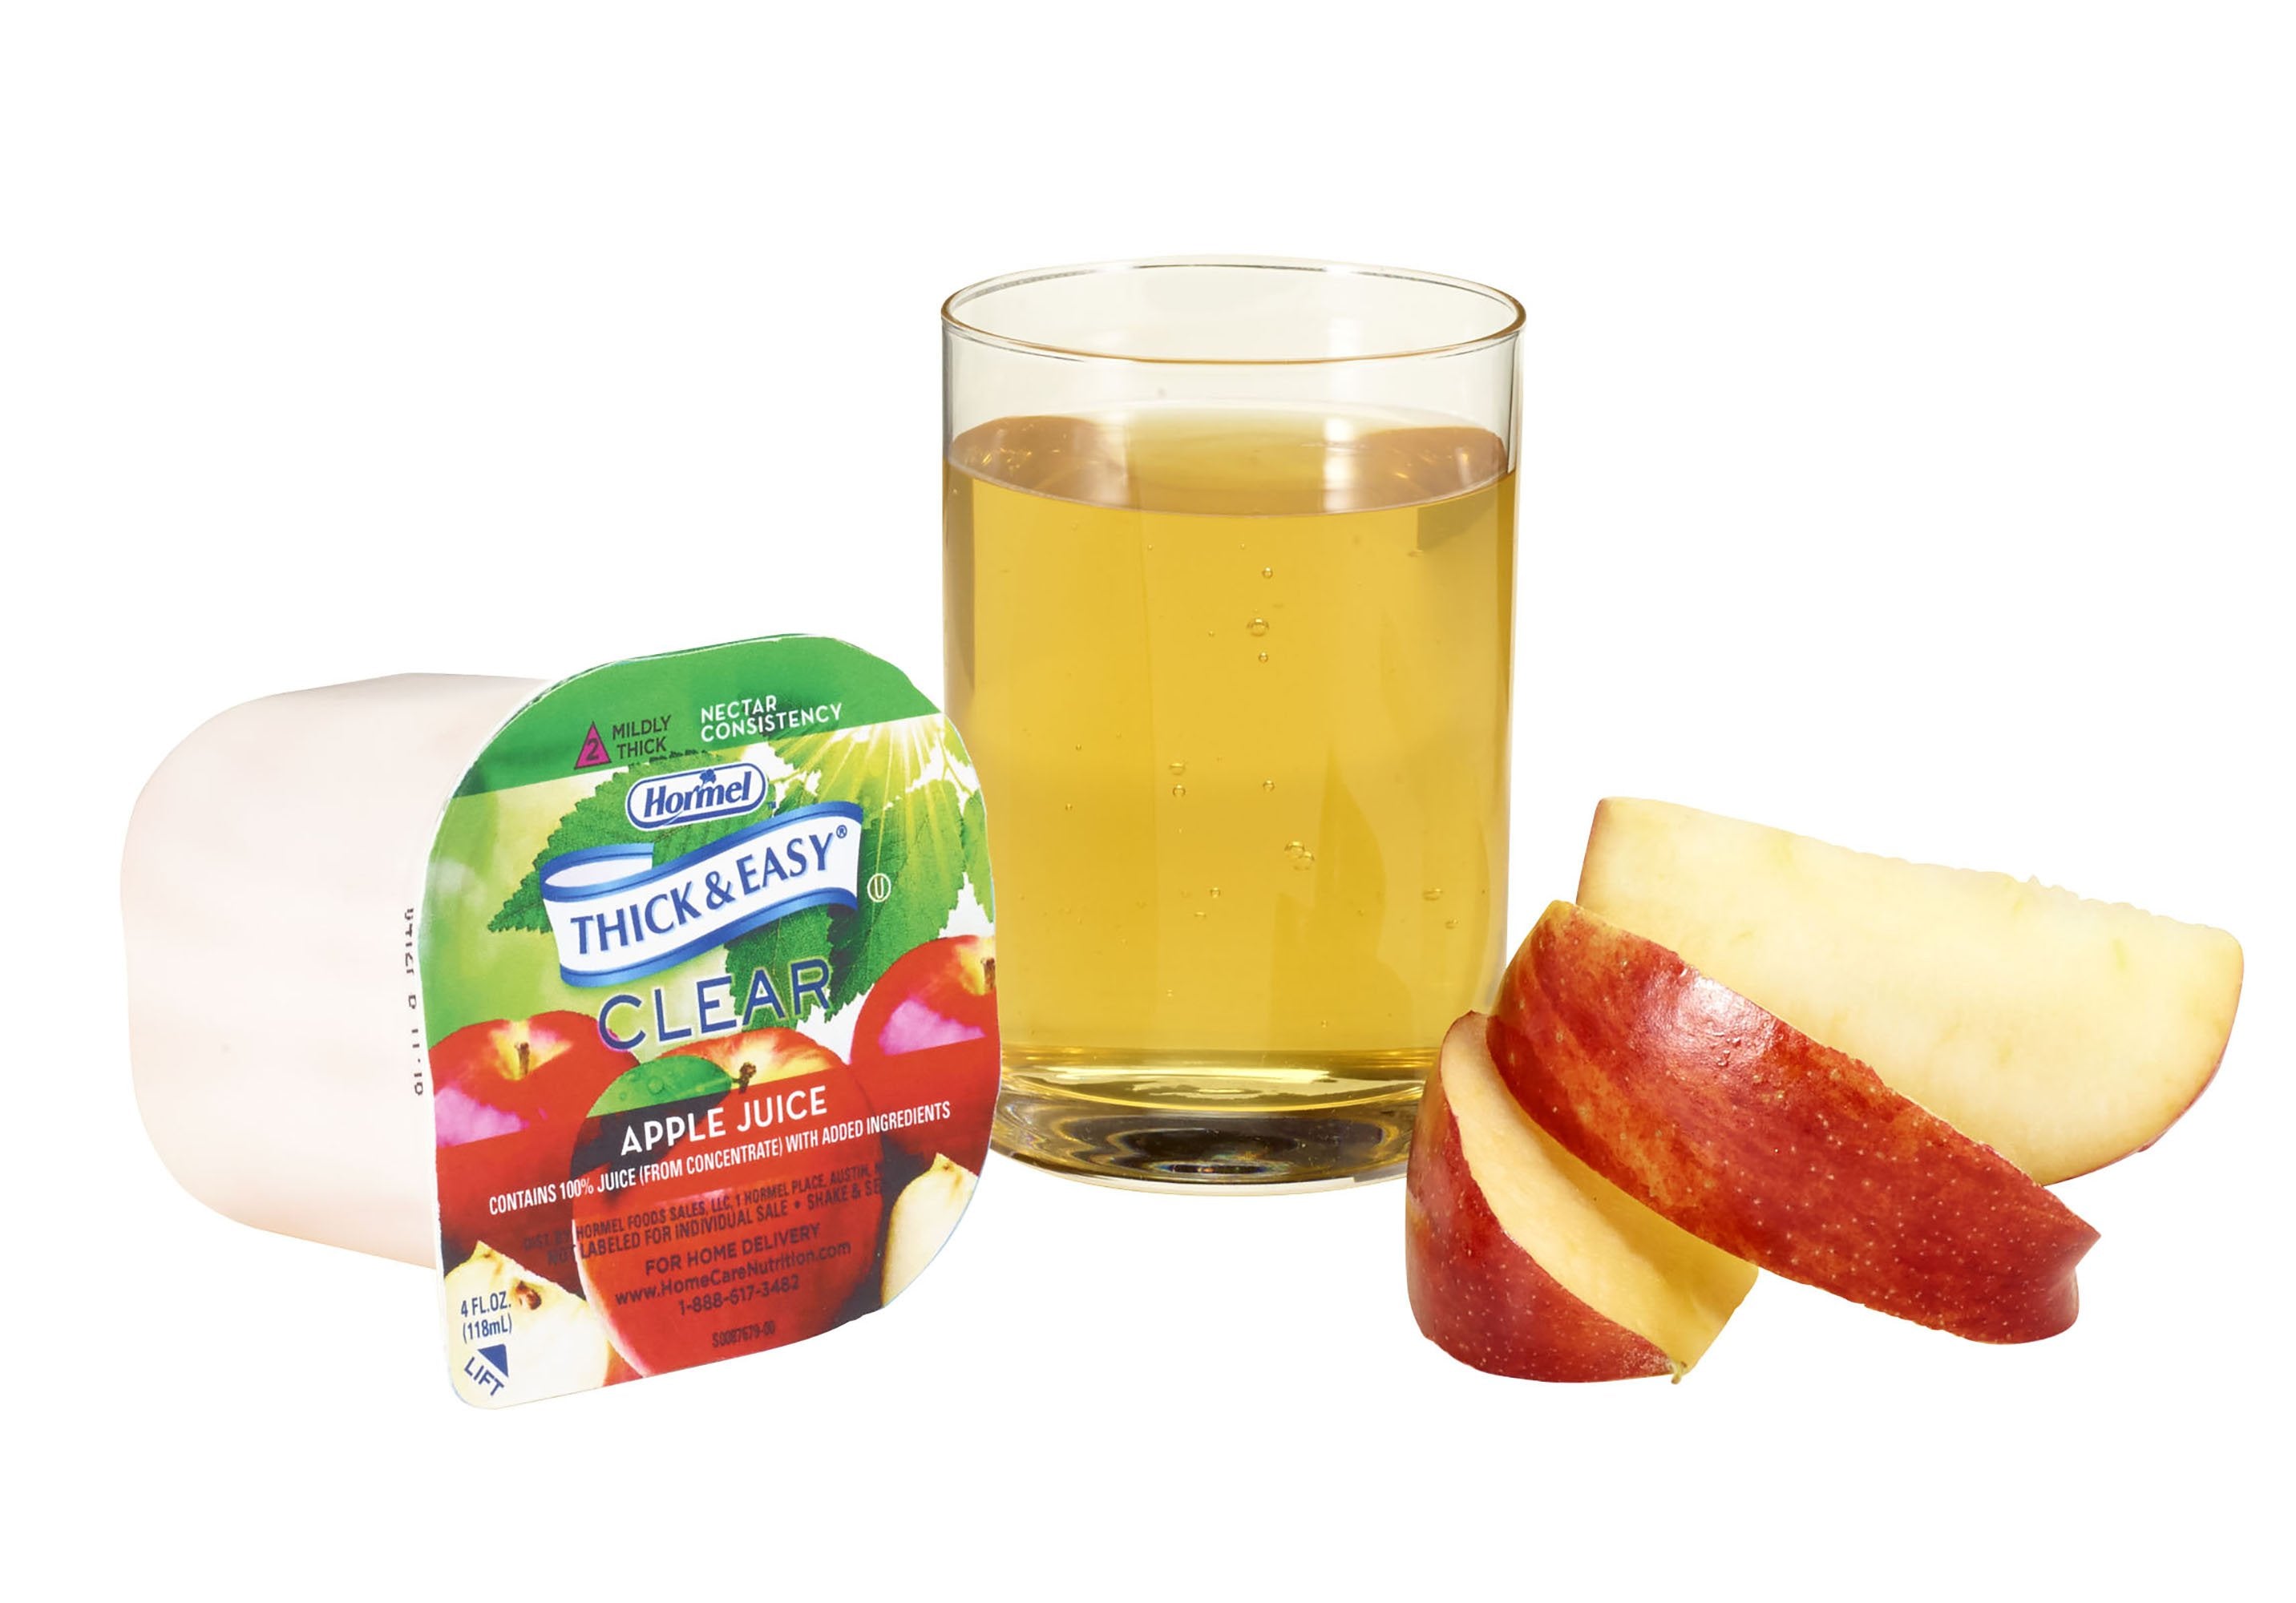 Thickened Beverage Thick & Easy 4 oz. Portion Cup Apple Flavor Liquid IDDSI Level 2 Mildly Thick